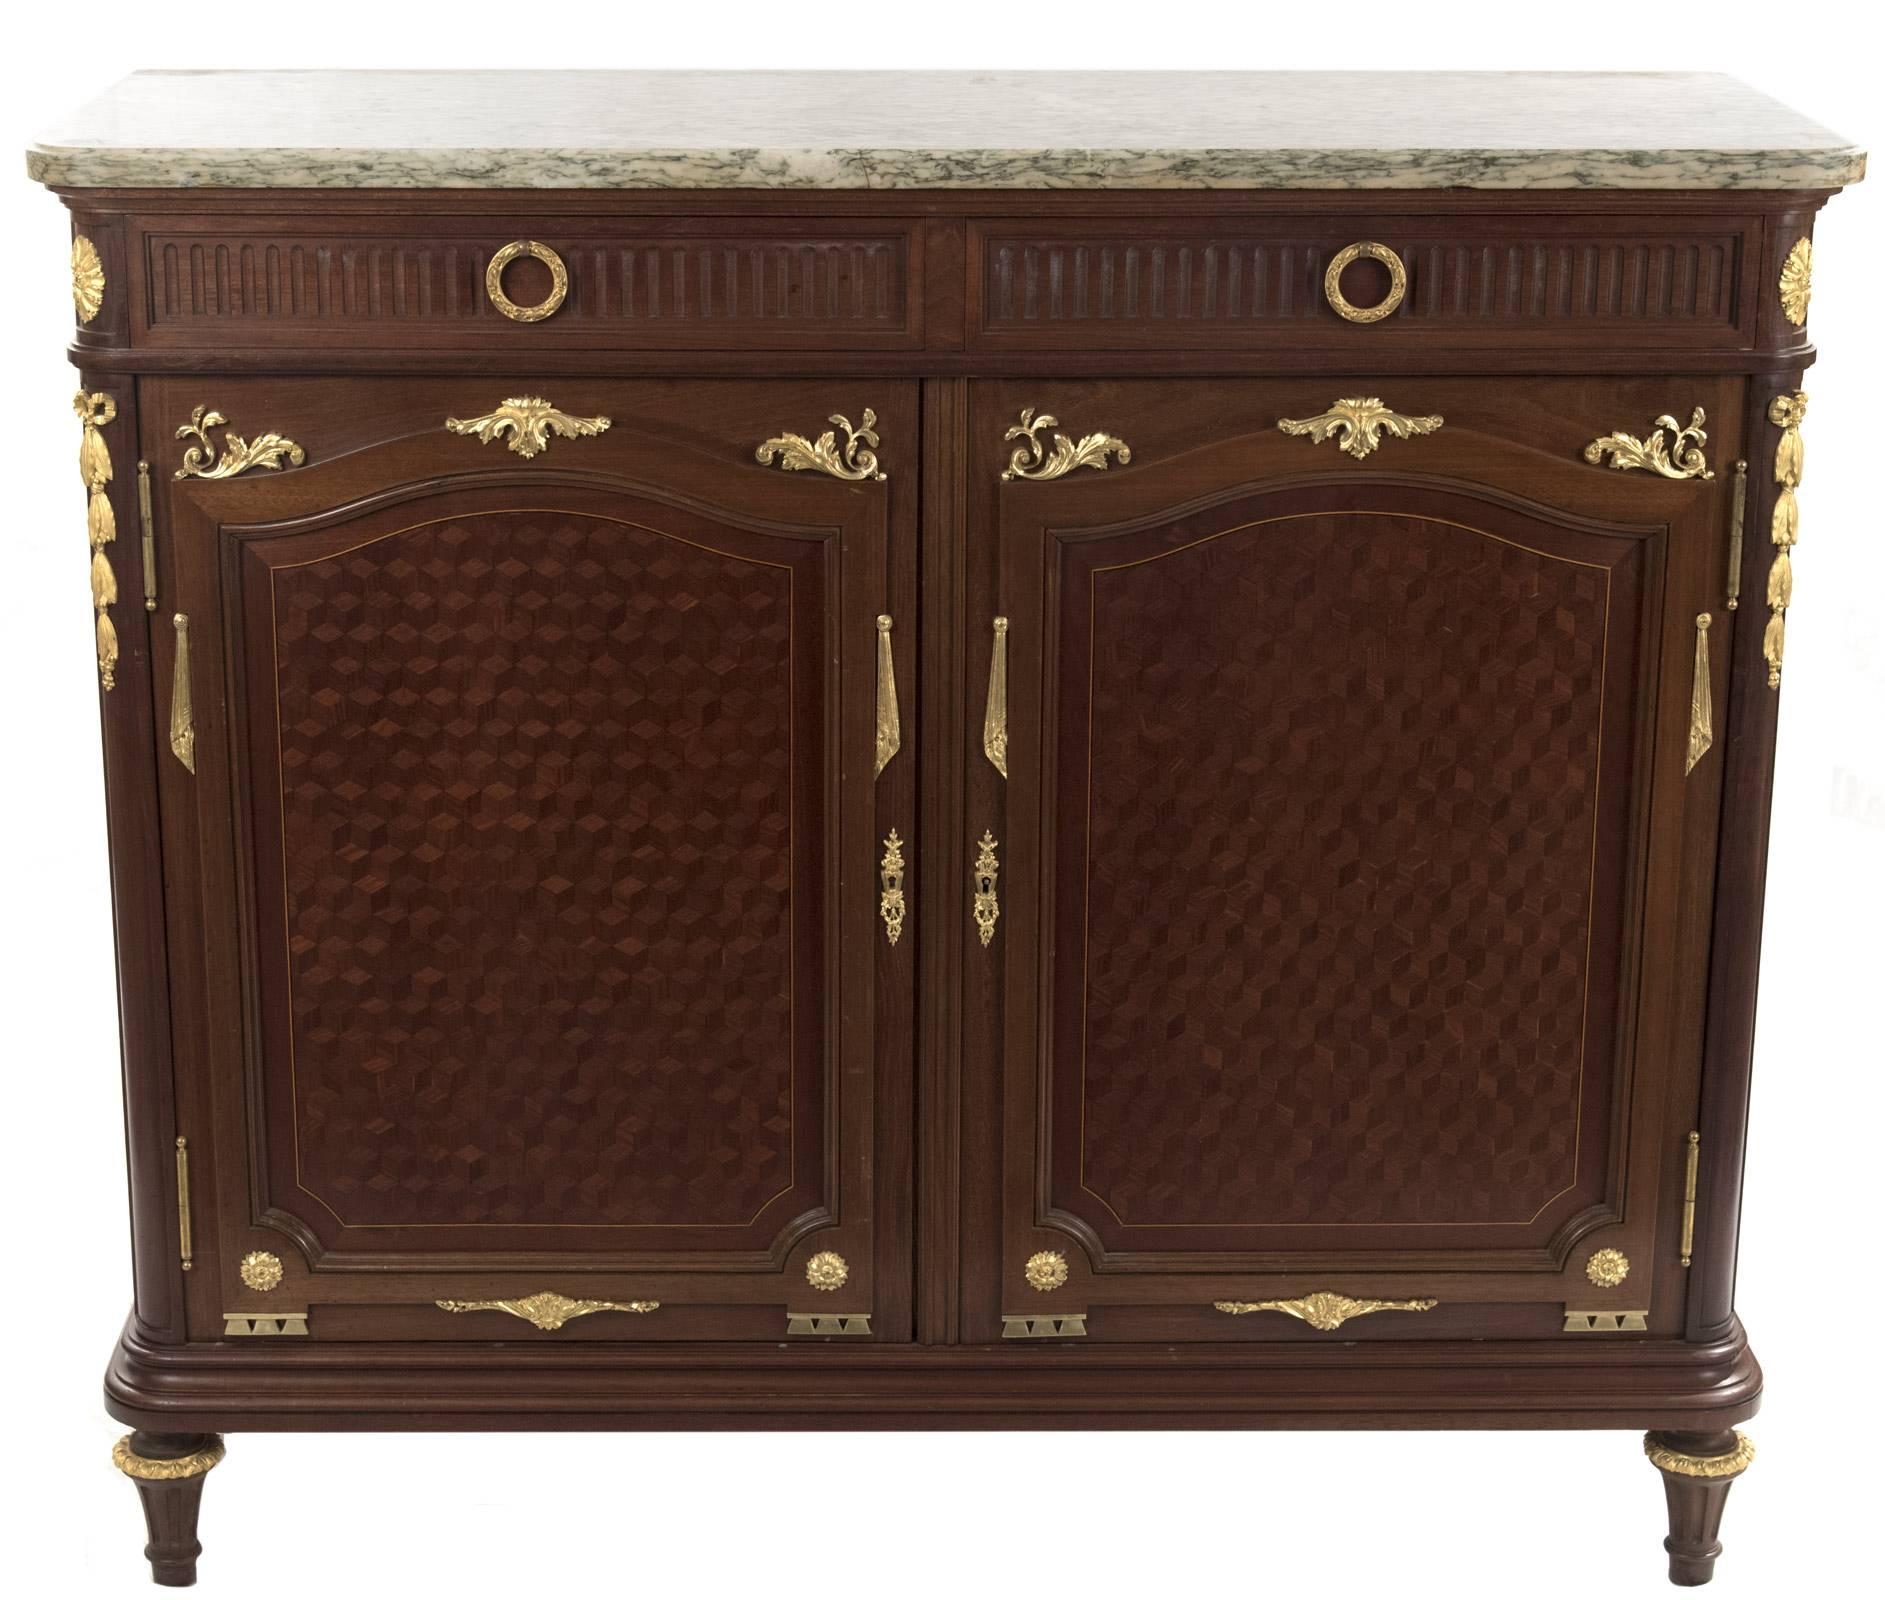 A late 19th century French Louis XVI style server with a green marble top above two long drawers, constructed with mortise and tenon drawer joints, with fluted fronts and round gilt-bronze pulls, flanked by ormolu rosettes on rounded corners. Two